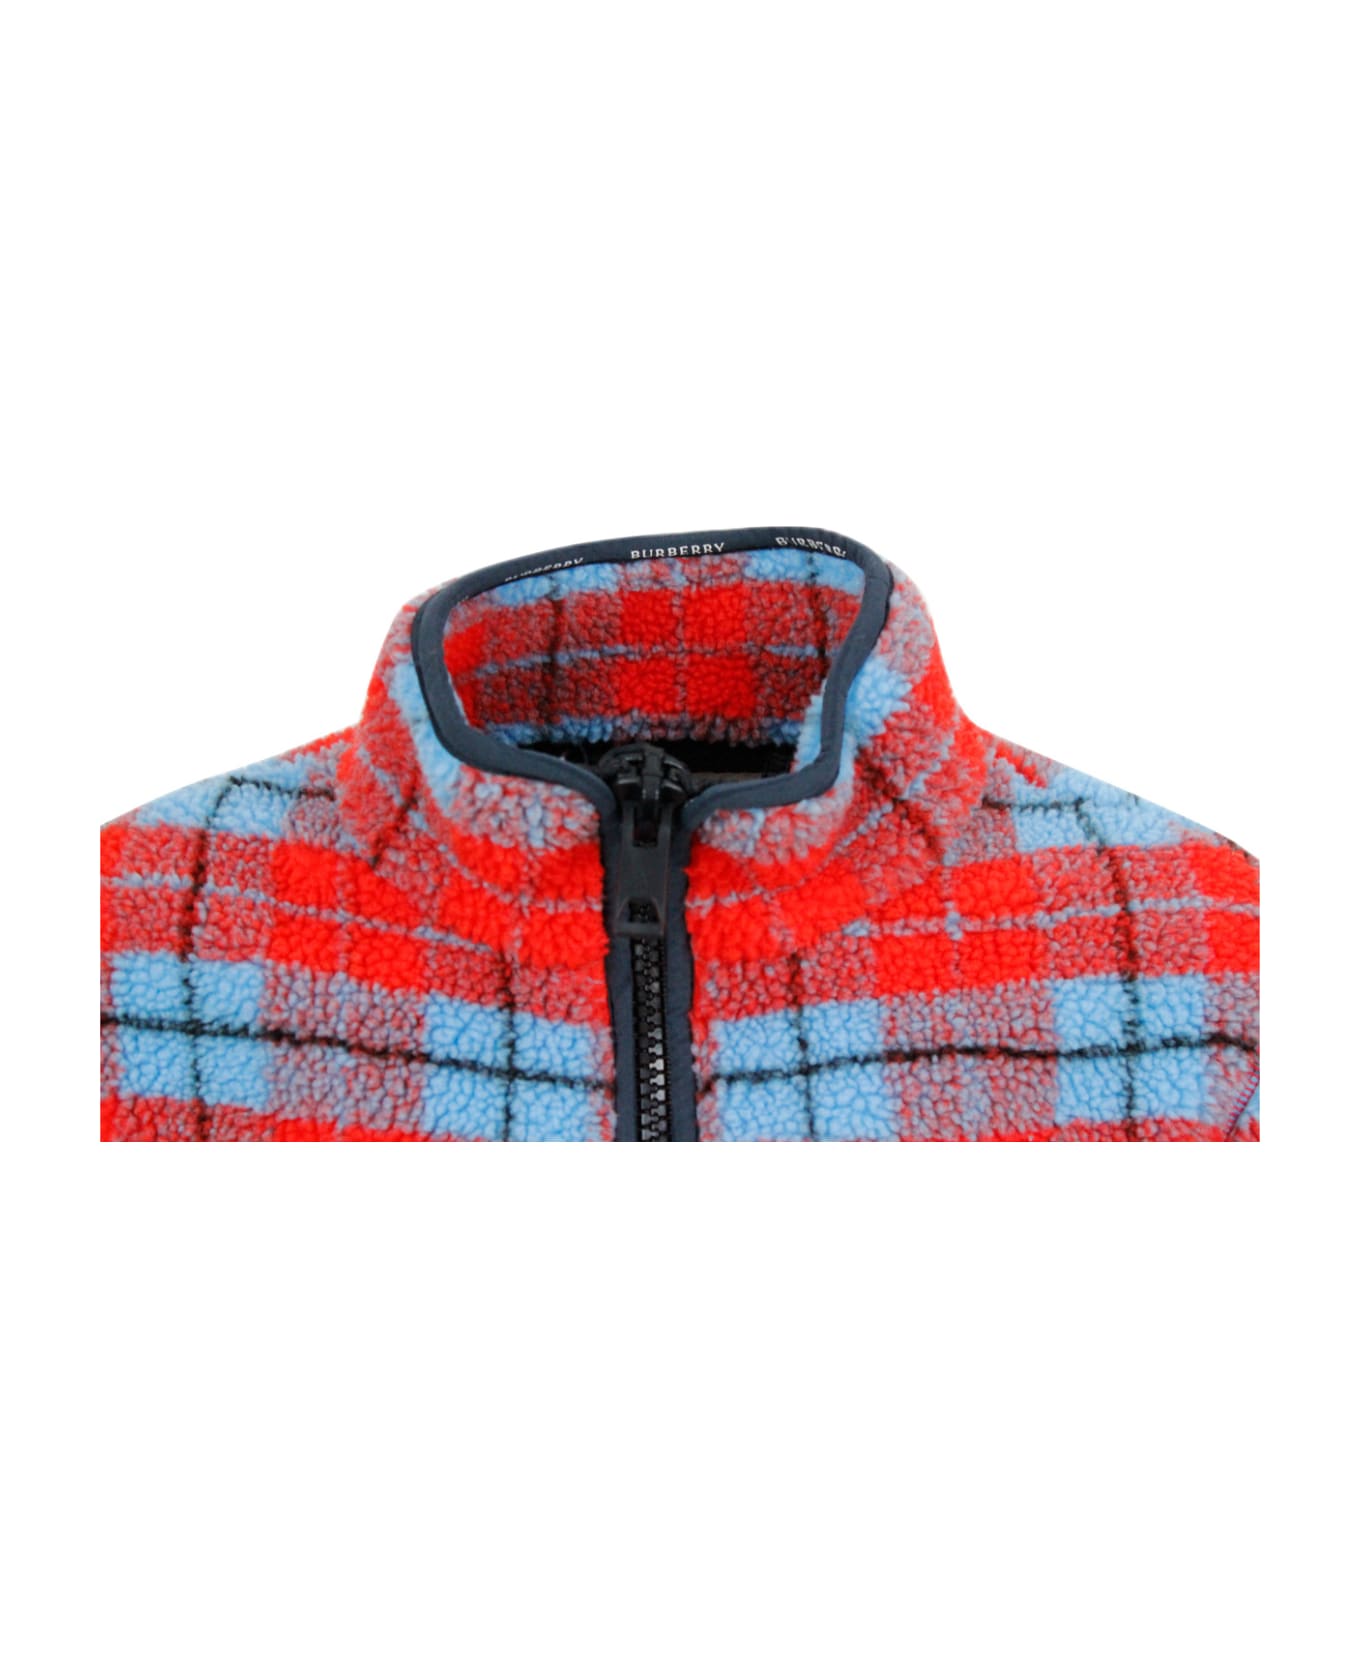 Burberry Jacket Made Of Cotton Fleece With Tartan Motif In Bright Colors And Half Zip Closure - Red